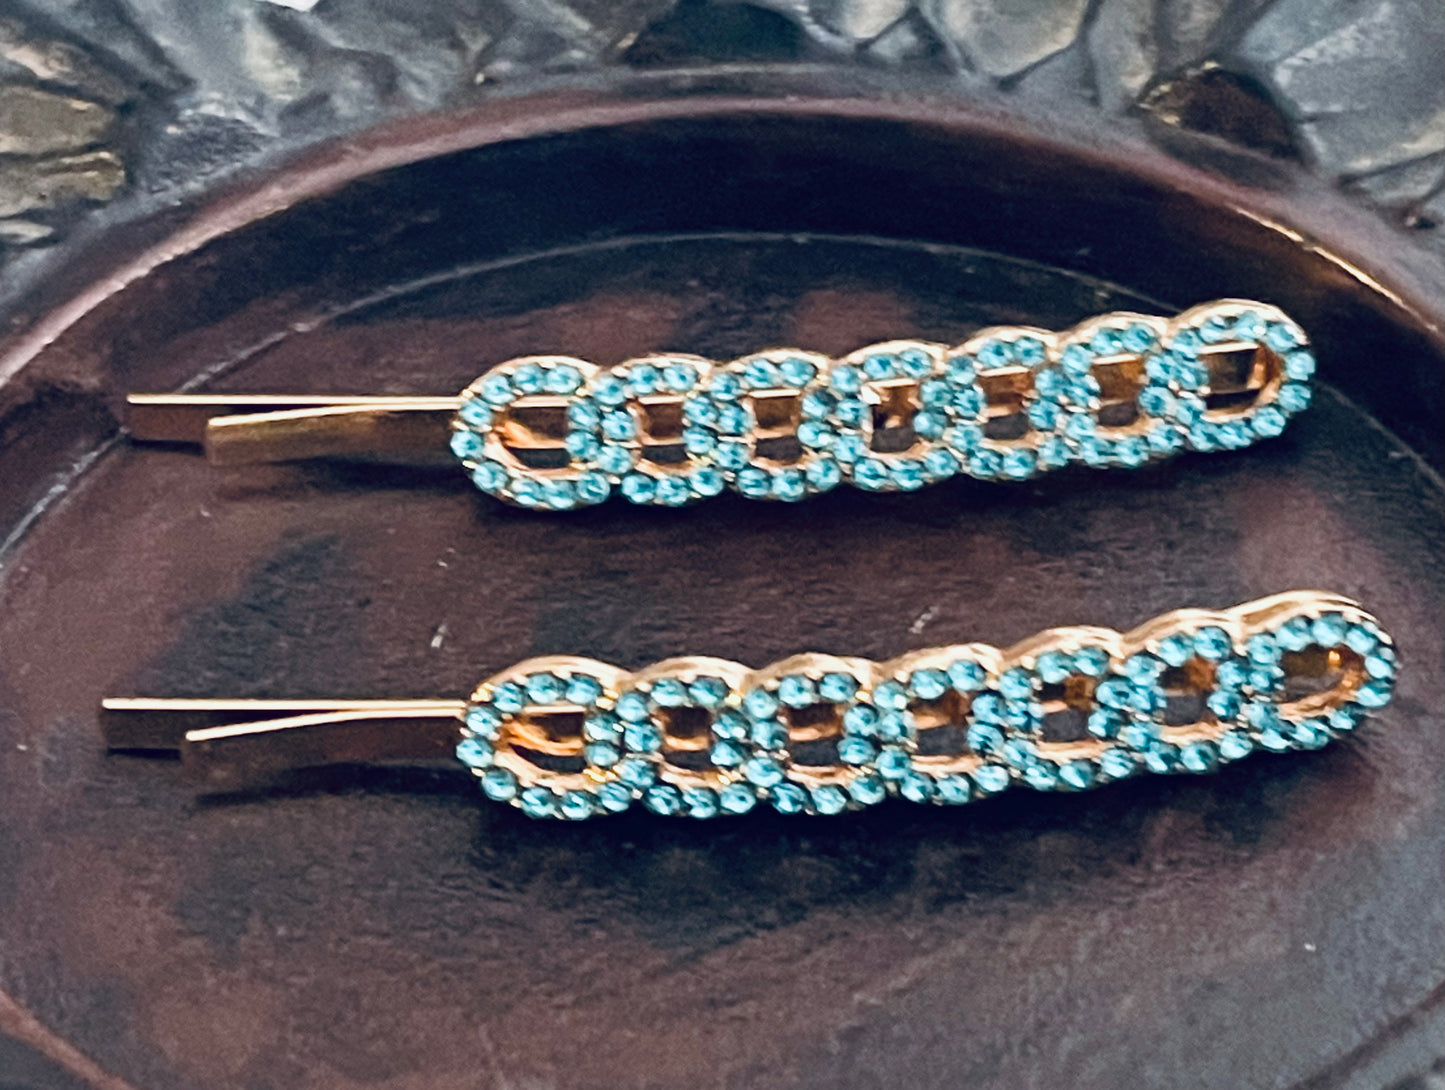 Teal blue Crystal rhinestone hairpins 2pc approximately 2.5”silver tone  formal hair accessories gift wedding bridesmaid princess accessory